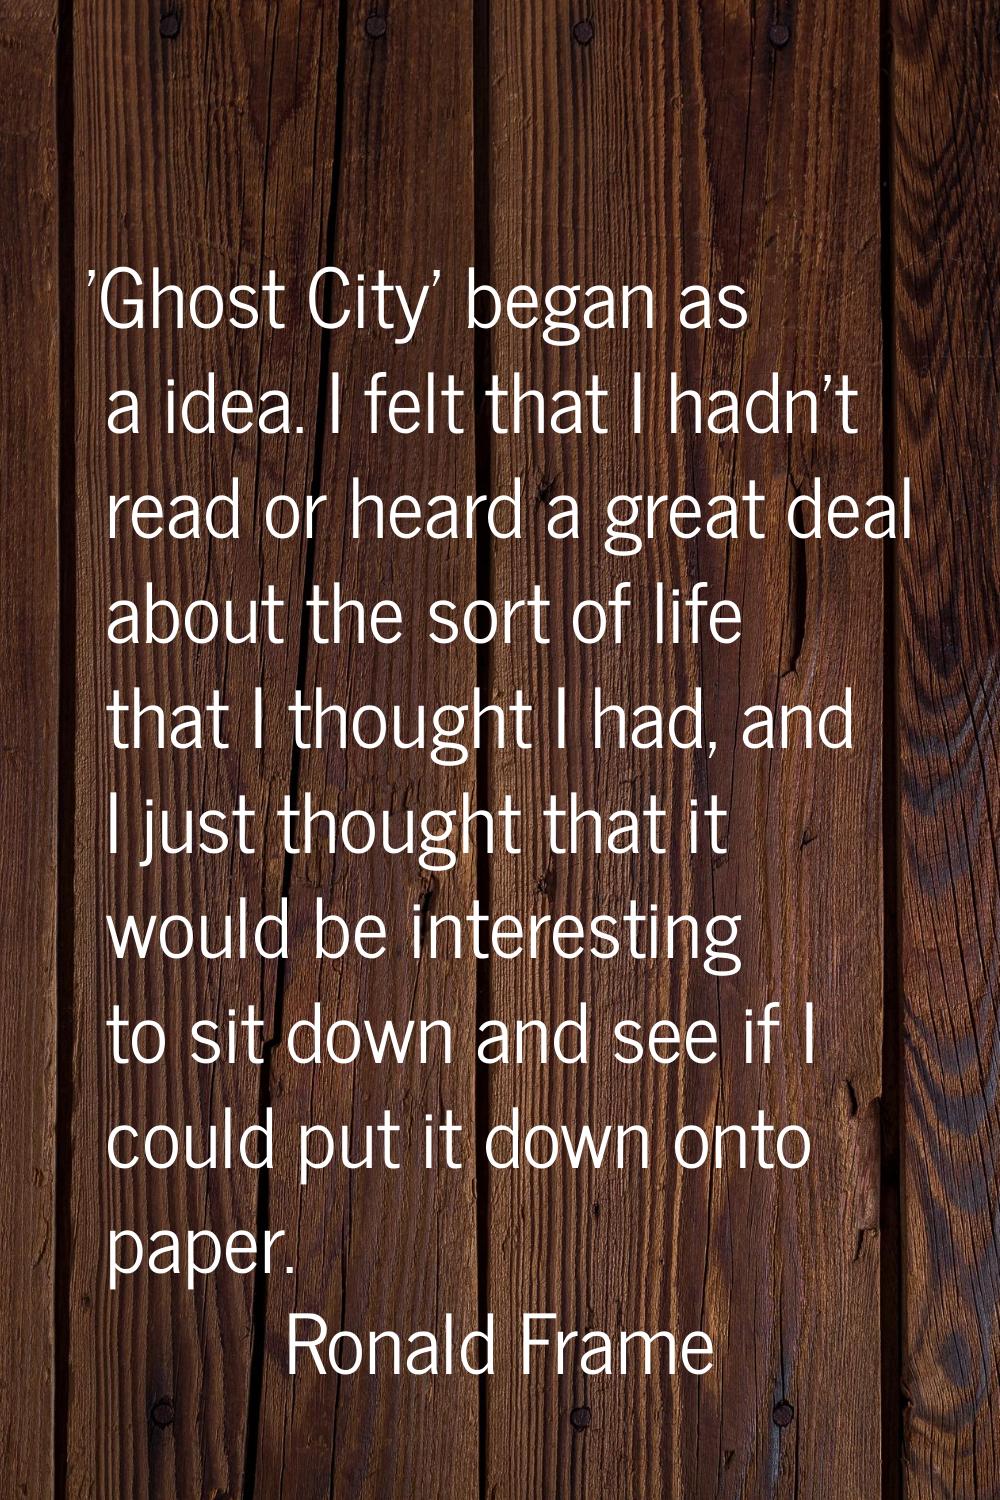 'Ghost City' began as a idea. I felt that I hadn't read or heard a great deal about the sort of lif